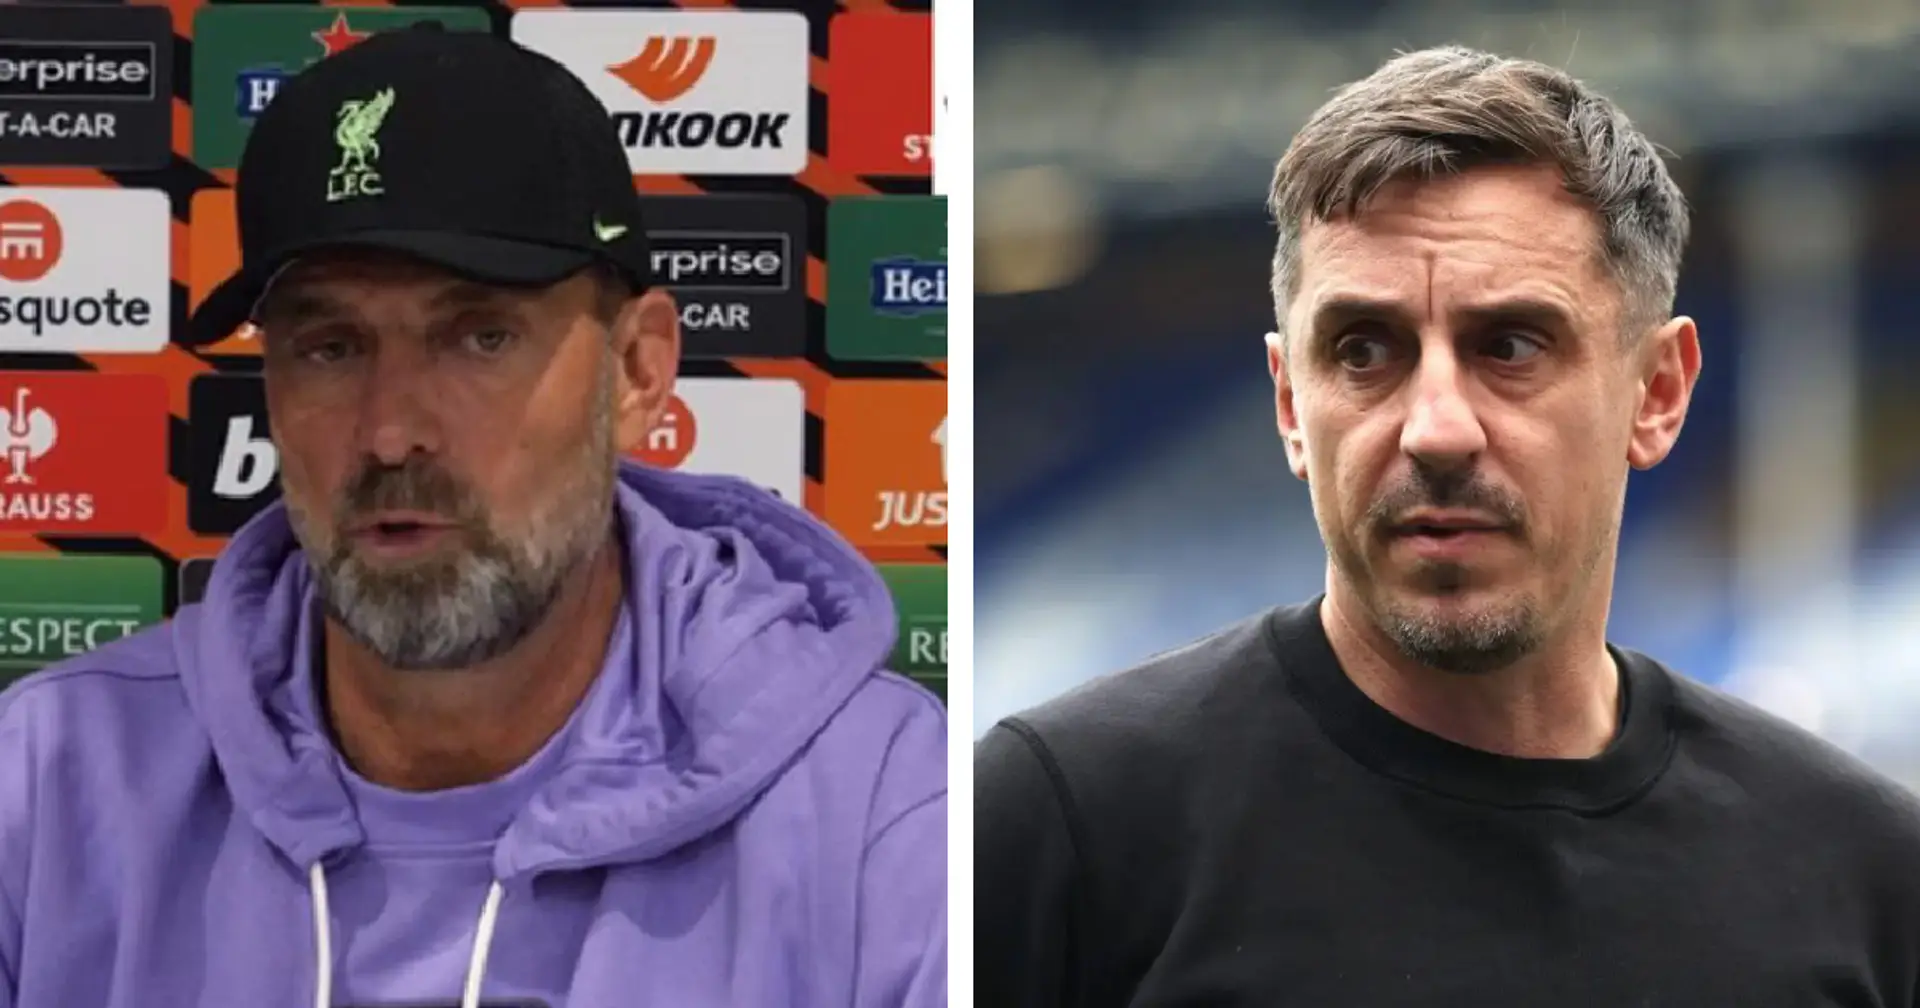 'Nobody was interested in that': Klopp takes unexpected dig at Neville after wrong Mac Allister comment